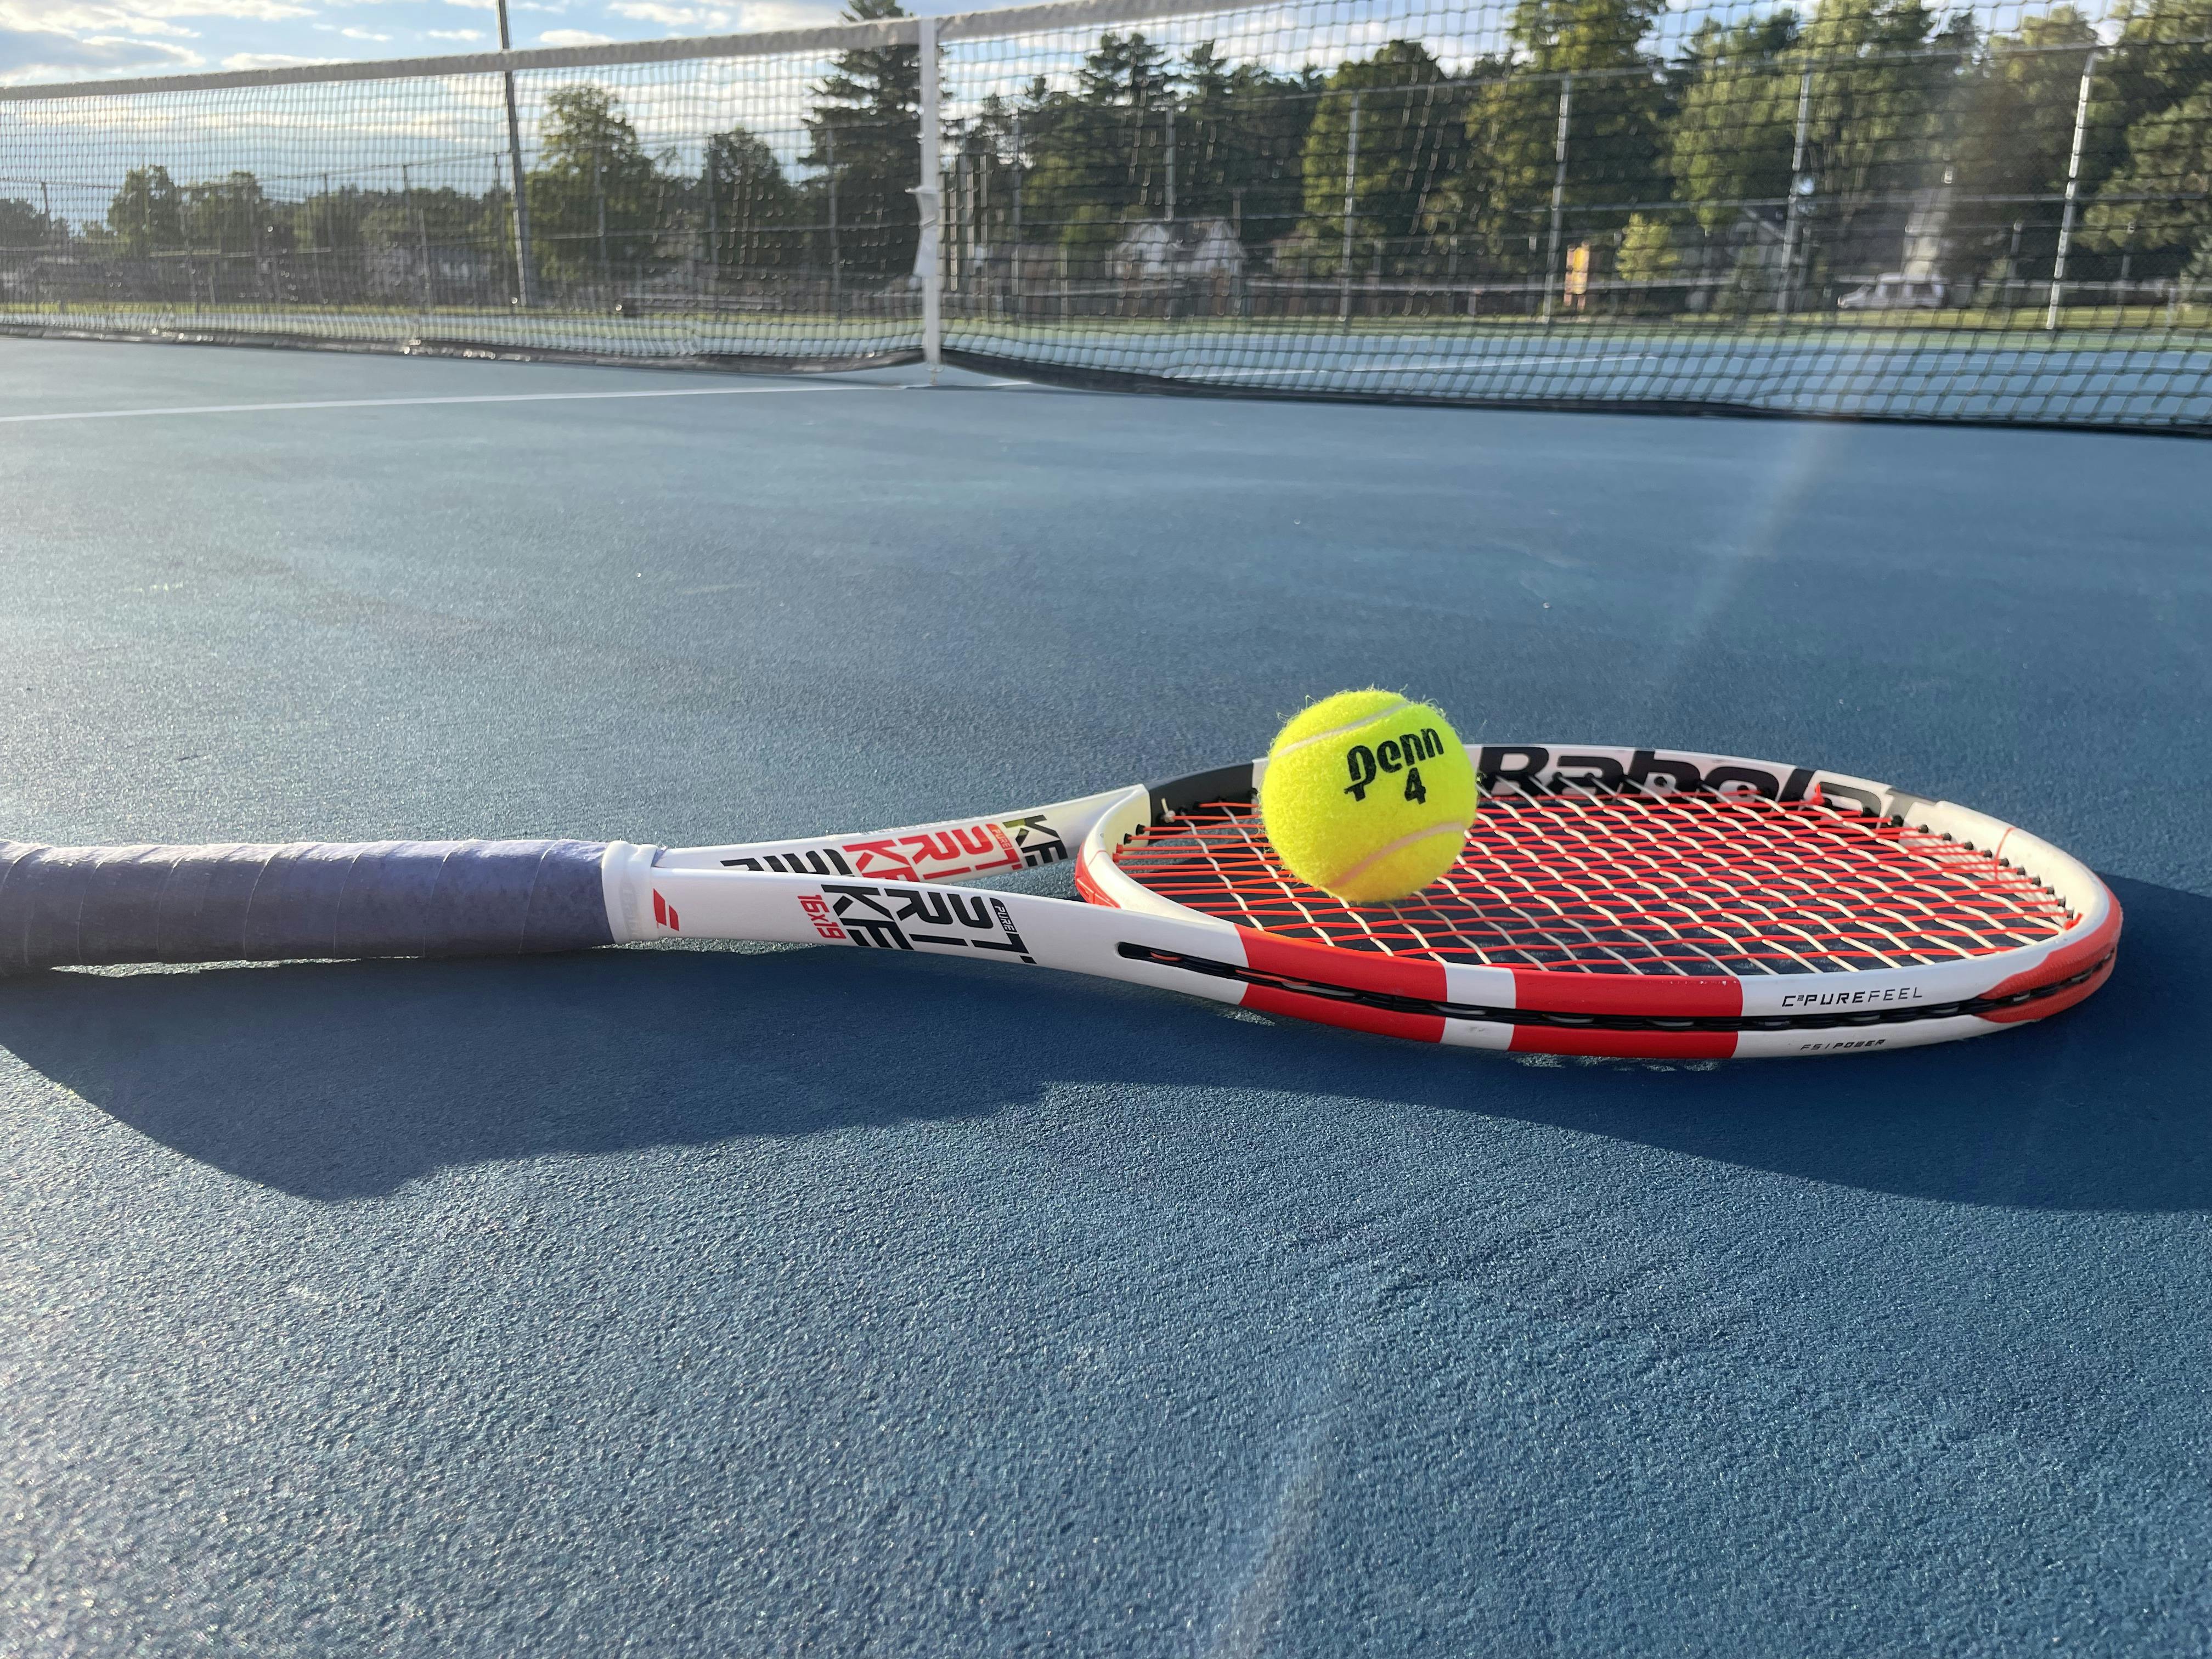 The Babolat Pure Strike 98 16x19 Racquet lying on the tennis court.